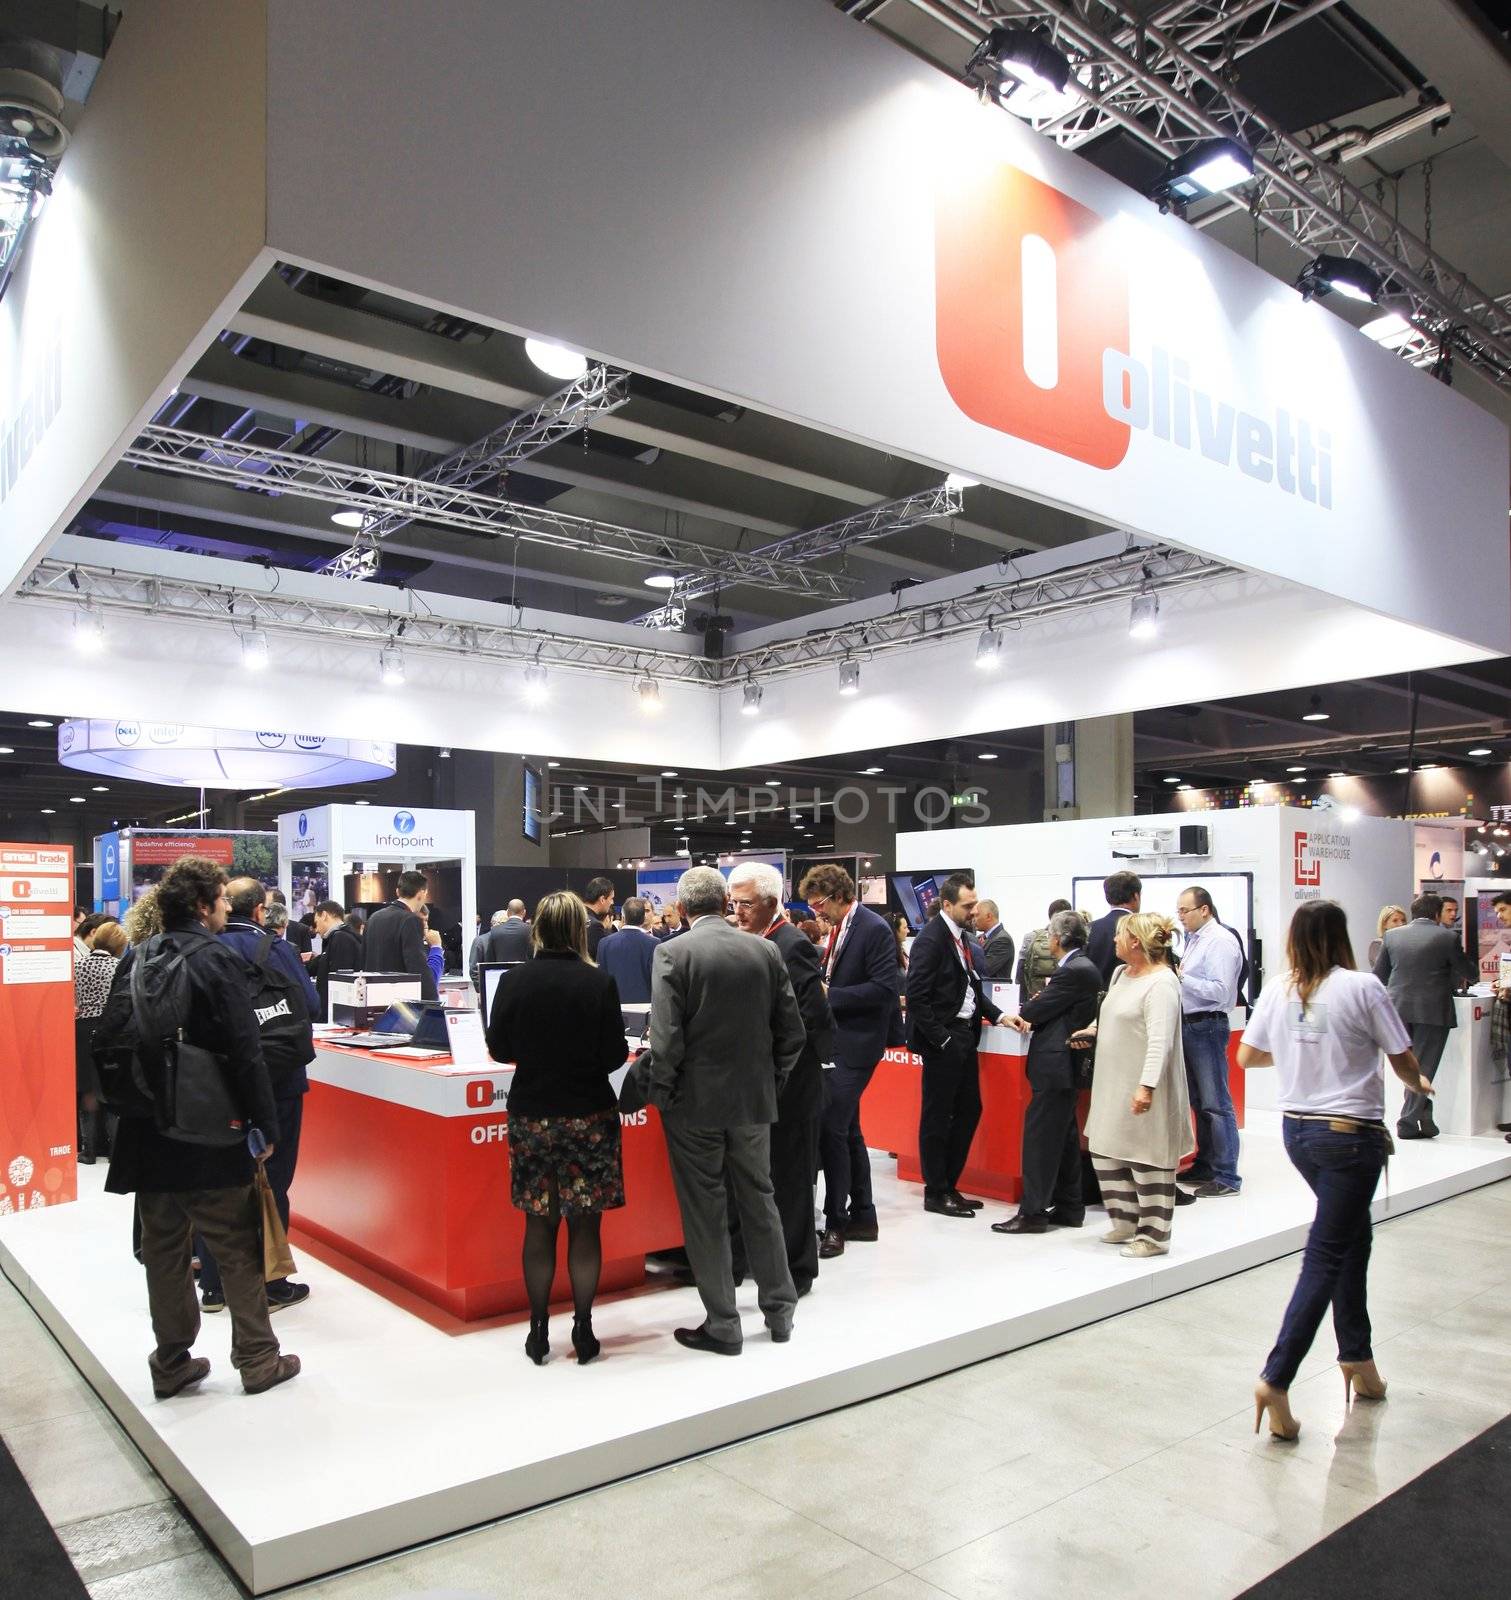 MILAN, ITALY - OCTOBER 17: People visit Olivetti technologies products exhibition area at SMAU, international fair of business intelligence and information technology October 17, 2012 in Milan, Italy.